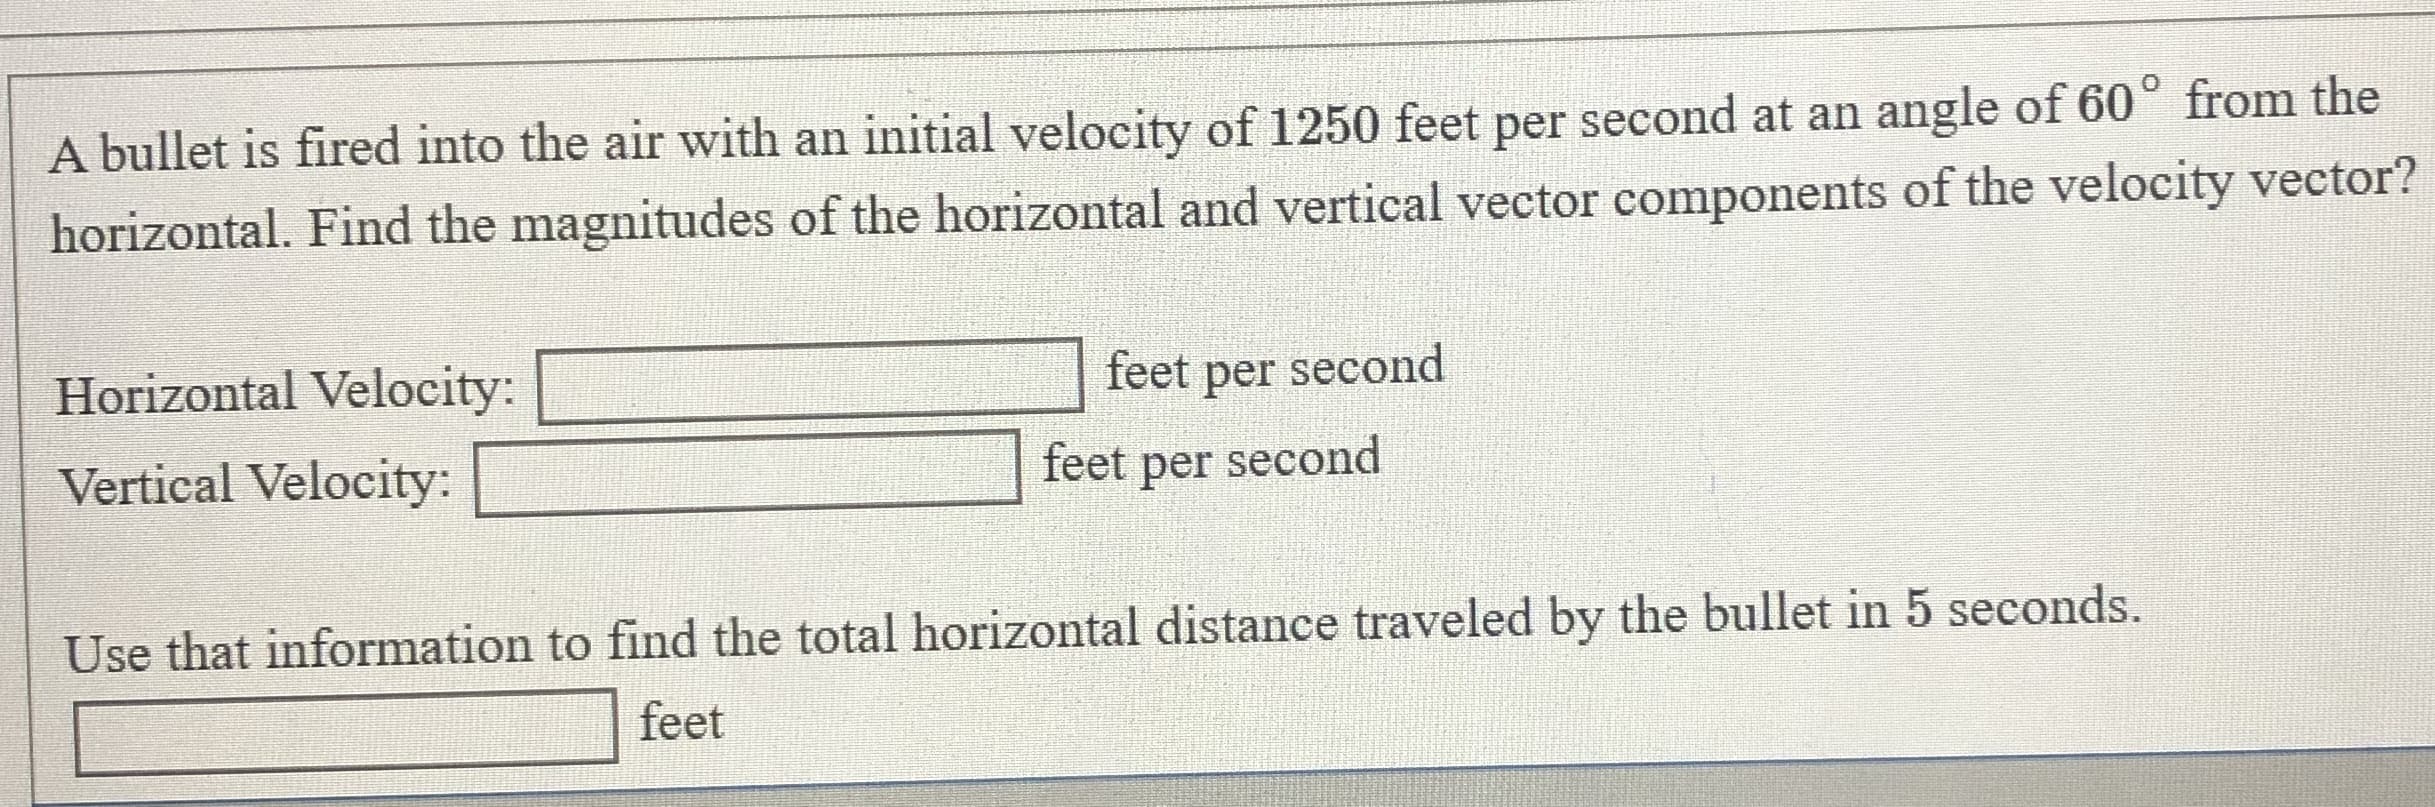 A bullet is fired into the air with an initial velocity of 1250 feet per second at an angle of 60° from the
horizontal. Find the magnitudes of the horizontal and vertical vector components of the velocity vector?
